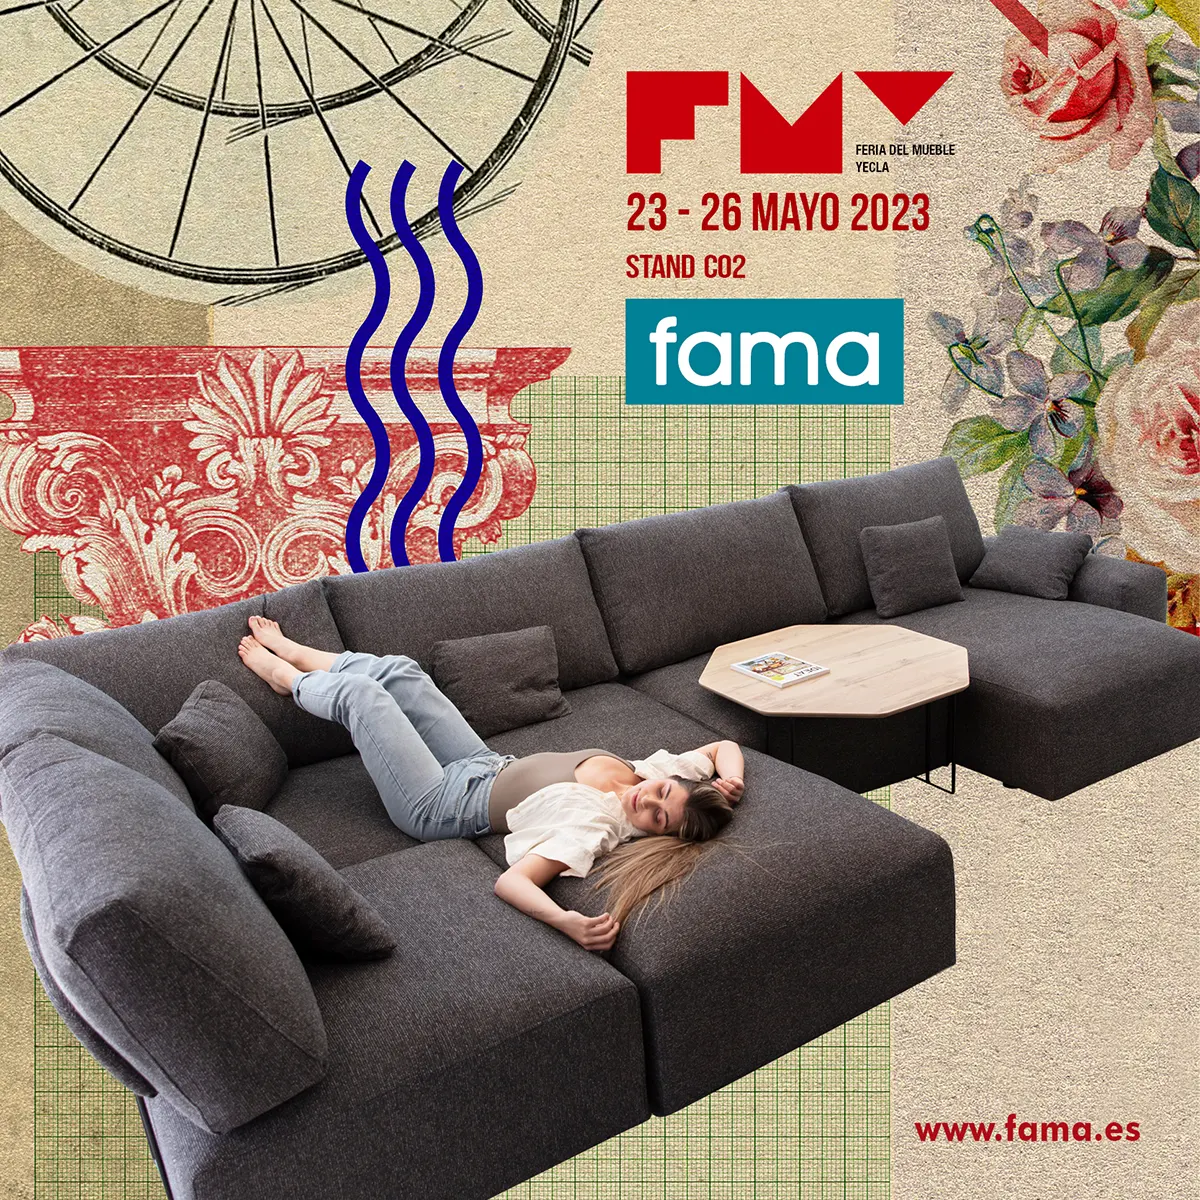 Fama at the 61st edition of the Yecla Furniture Fair